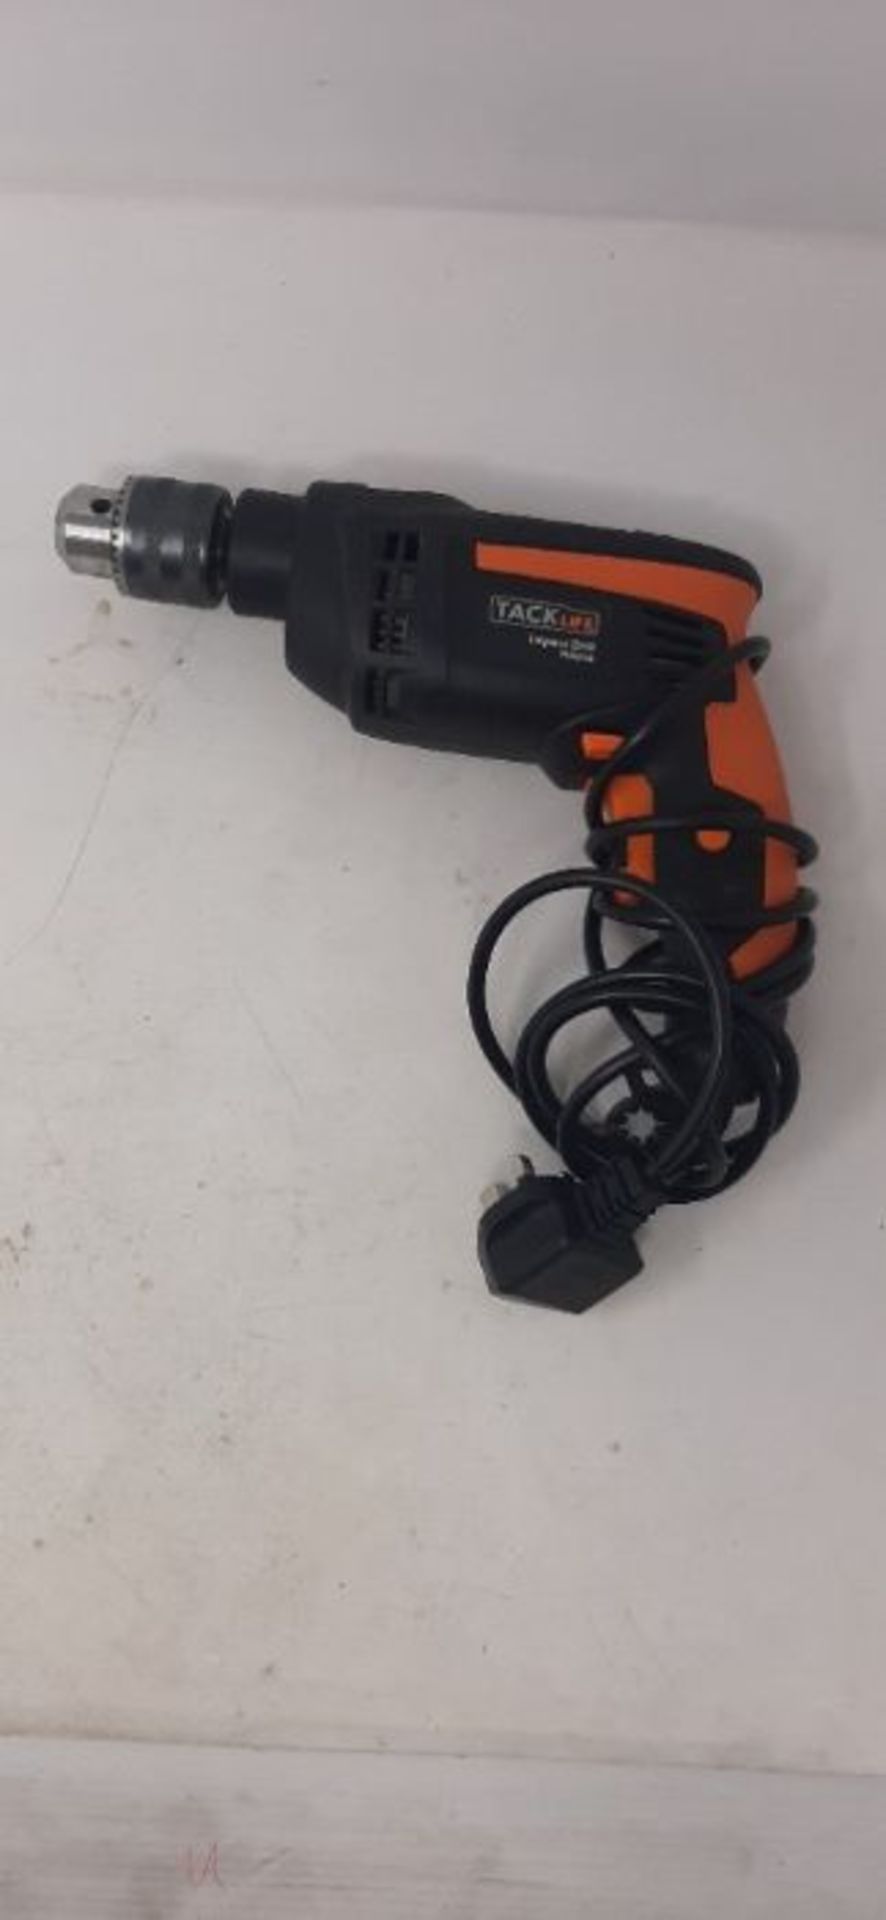 Hammer Drill, 360°Rotating Handle,Hammer and Drill 2 Functions,2800 RPM, Keyed Chuck,